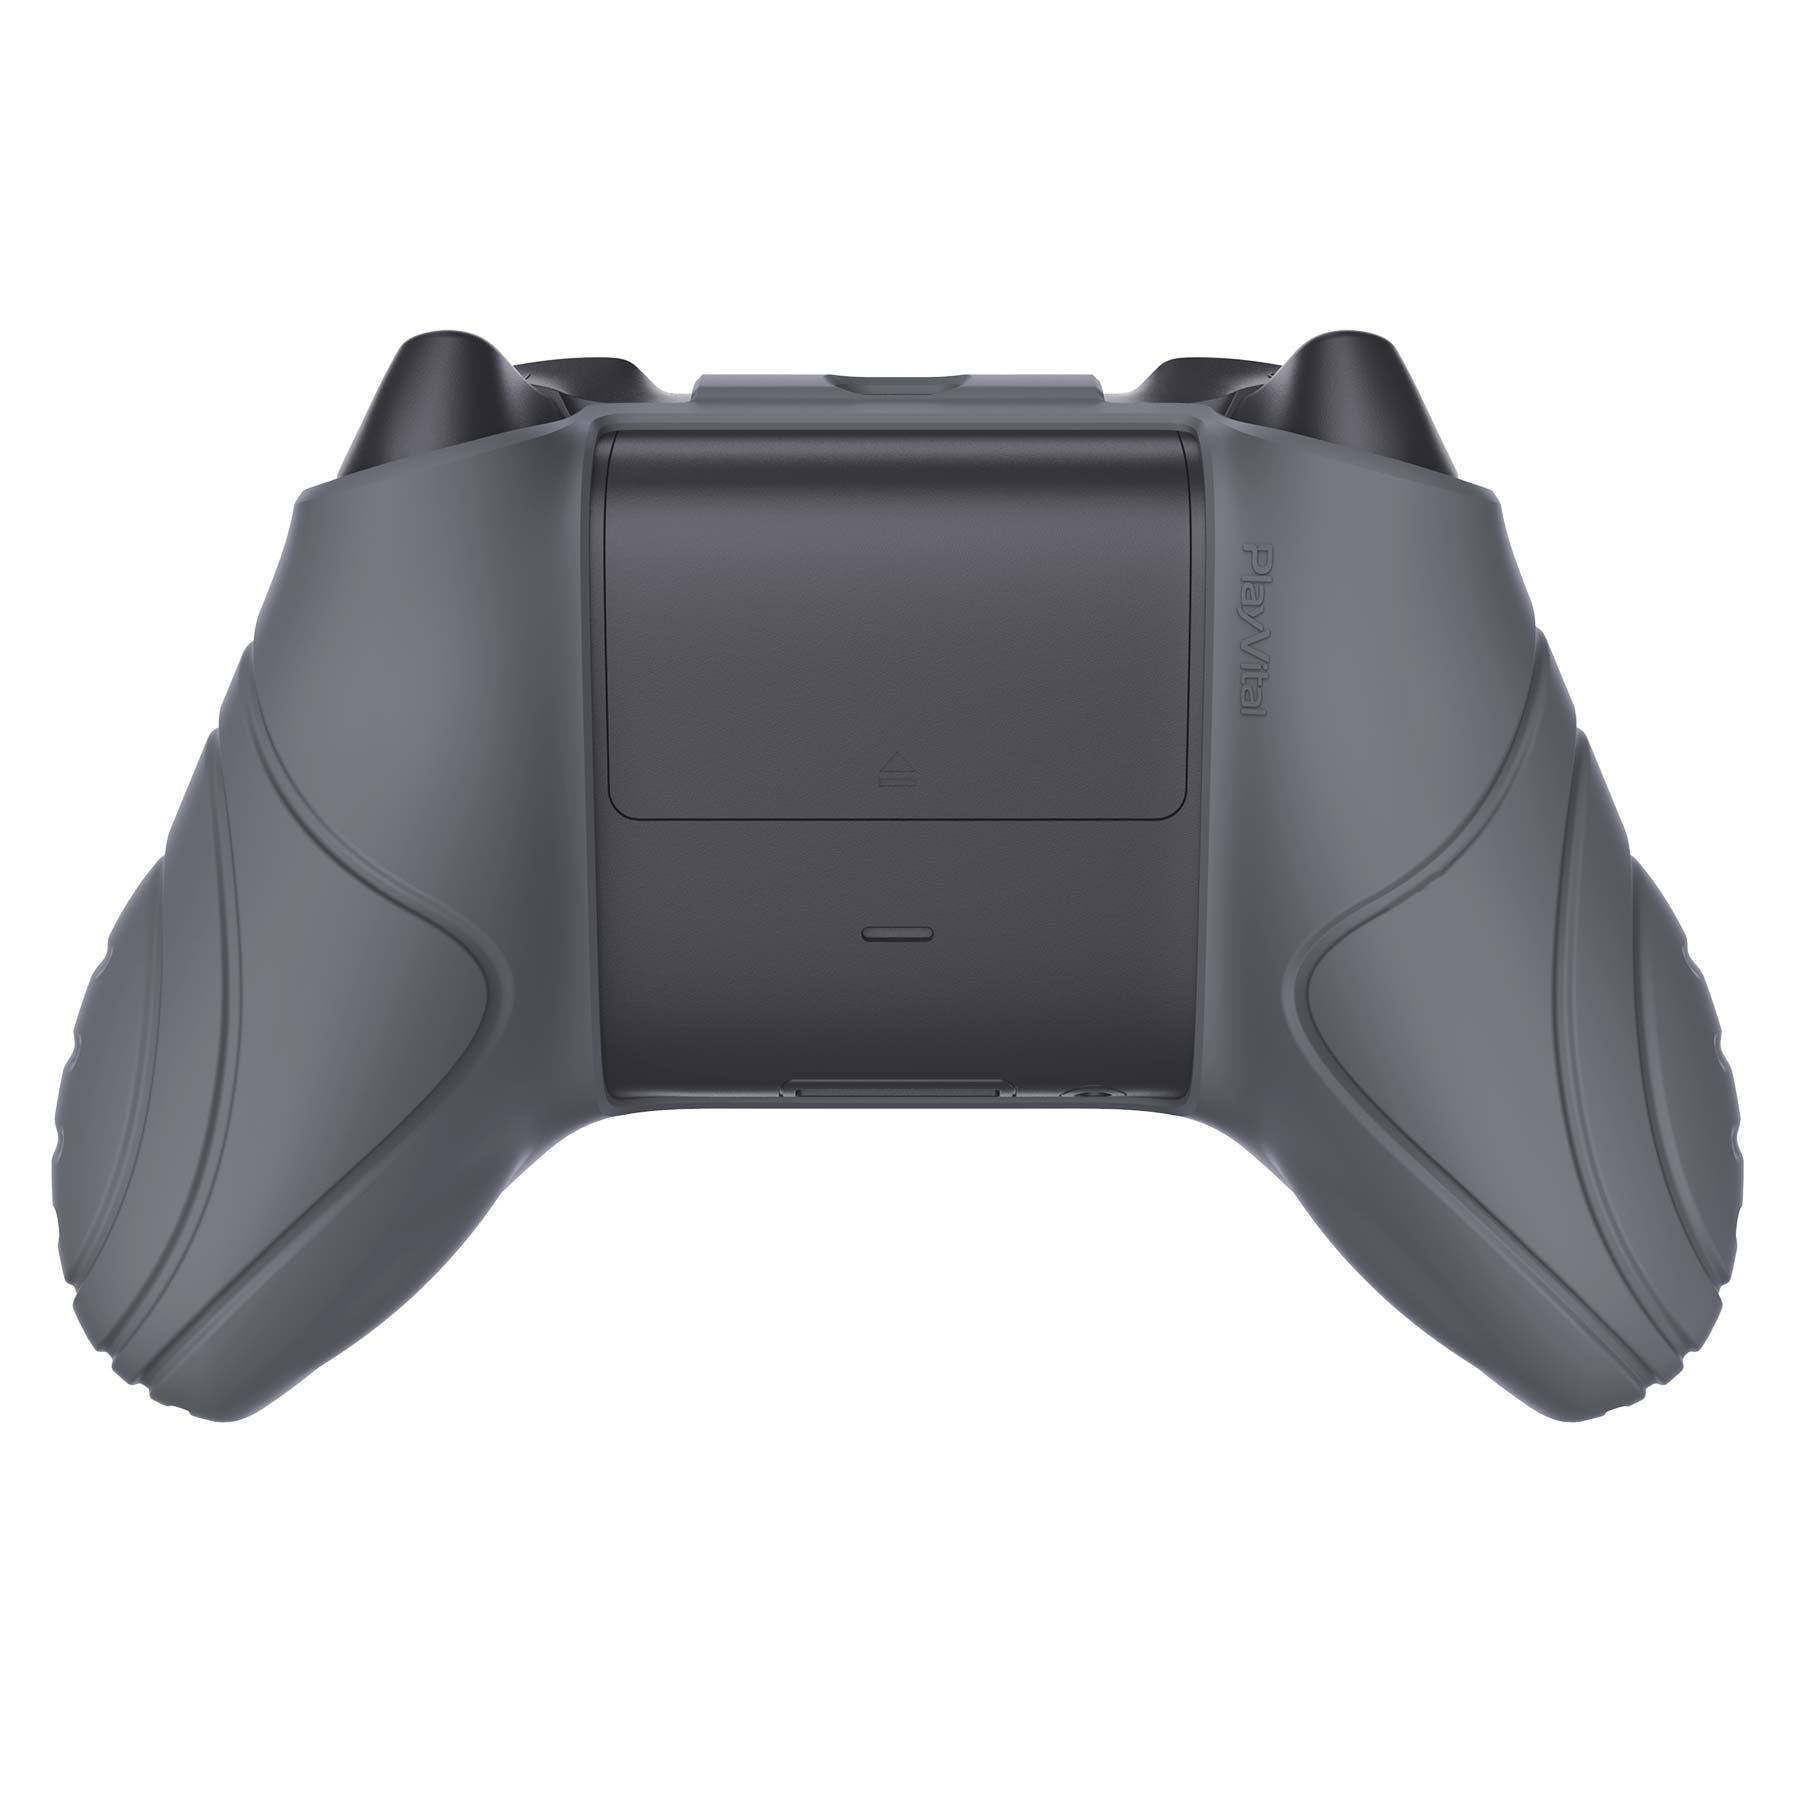 PlayVital Samurai Edition Gray Anti-slip Controller Grip Silicone Skin, Ergonomic Soft Rubber Protective Case Cover for Xbox Series S/X Controller with Black Thumb Stick Caps - WAX3006 PlayVital